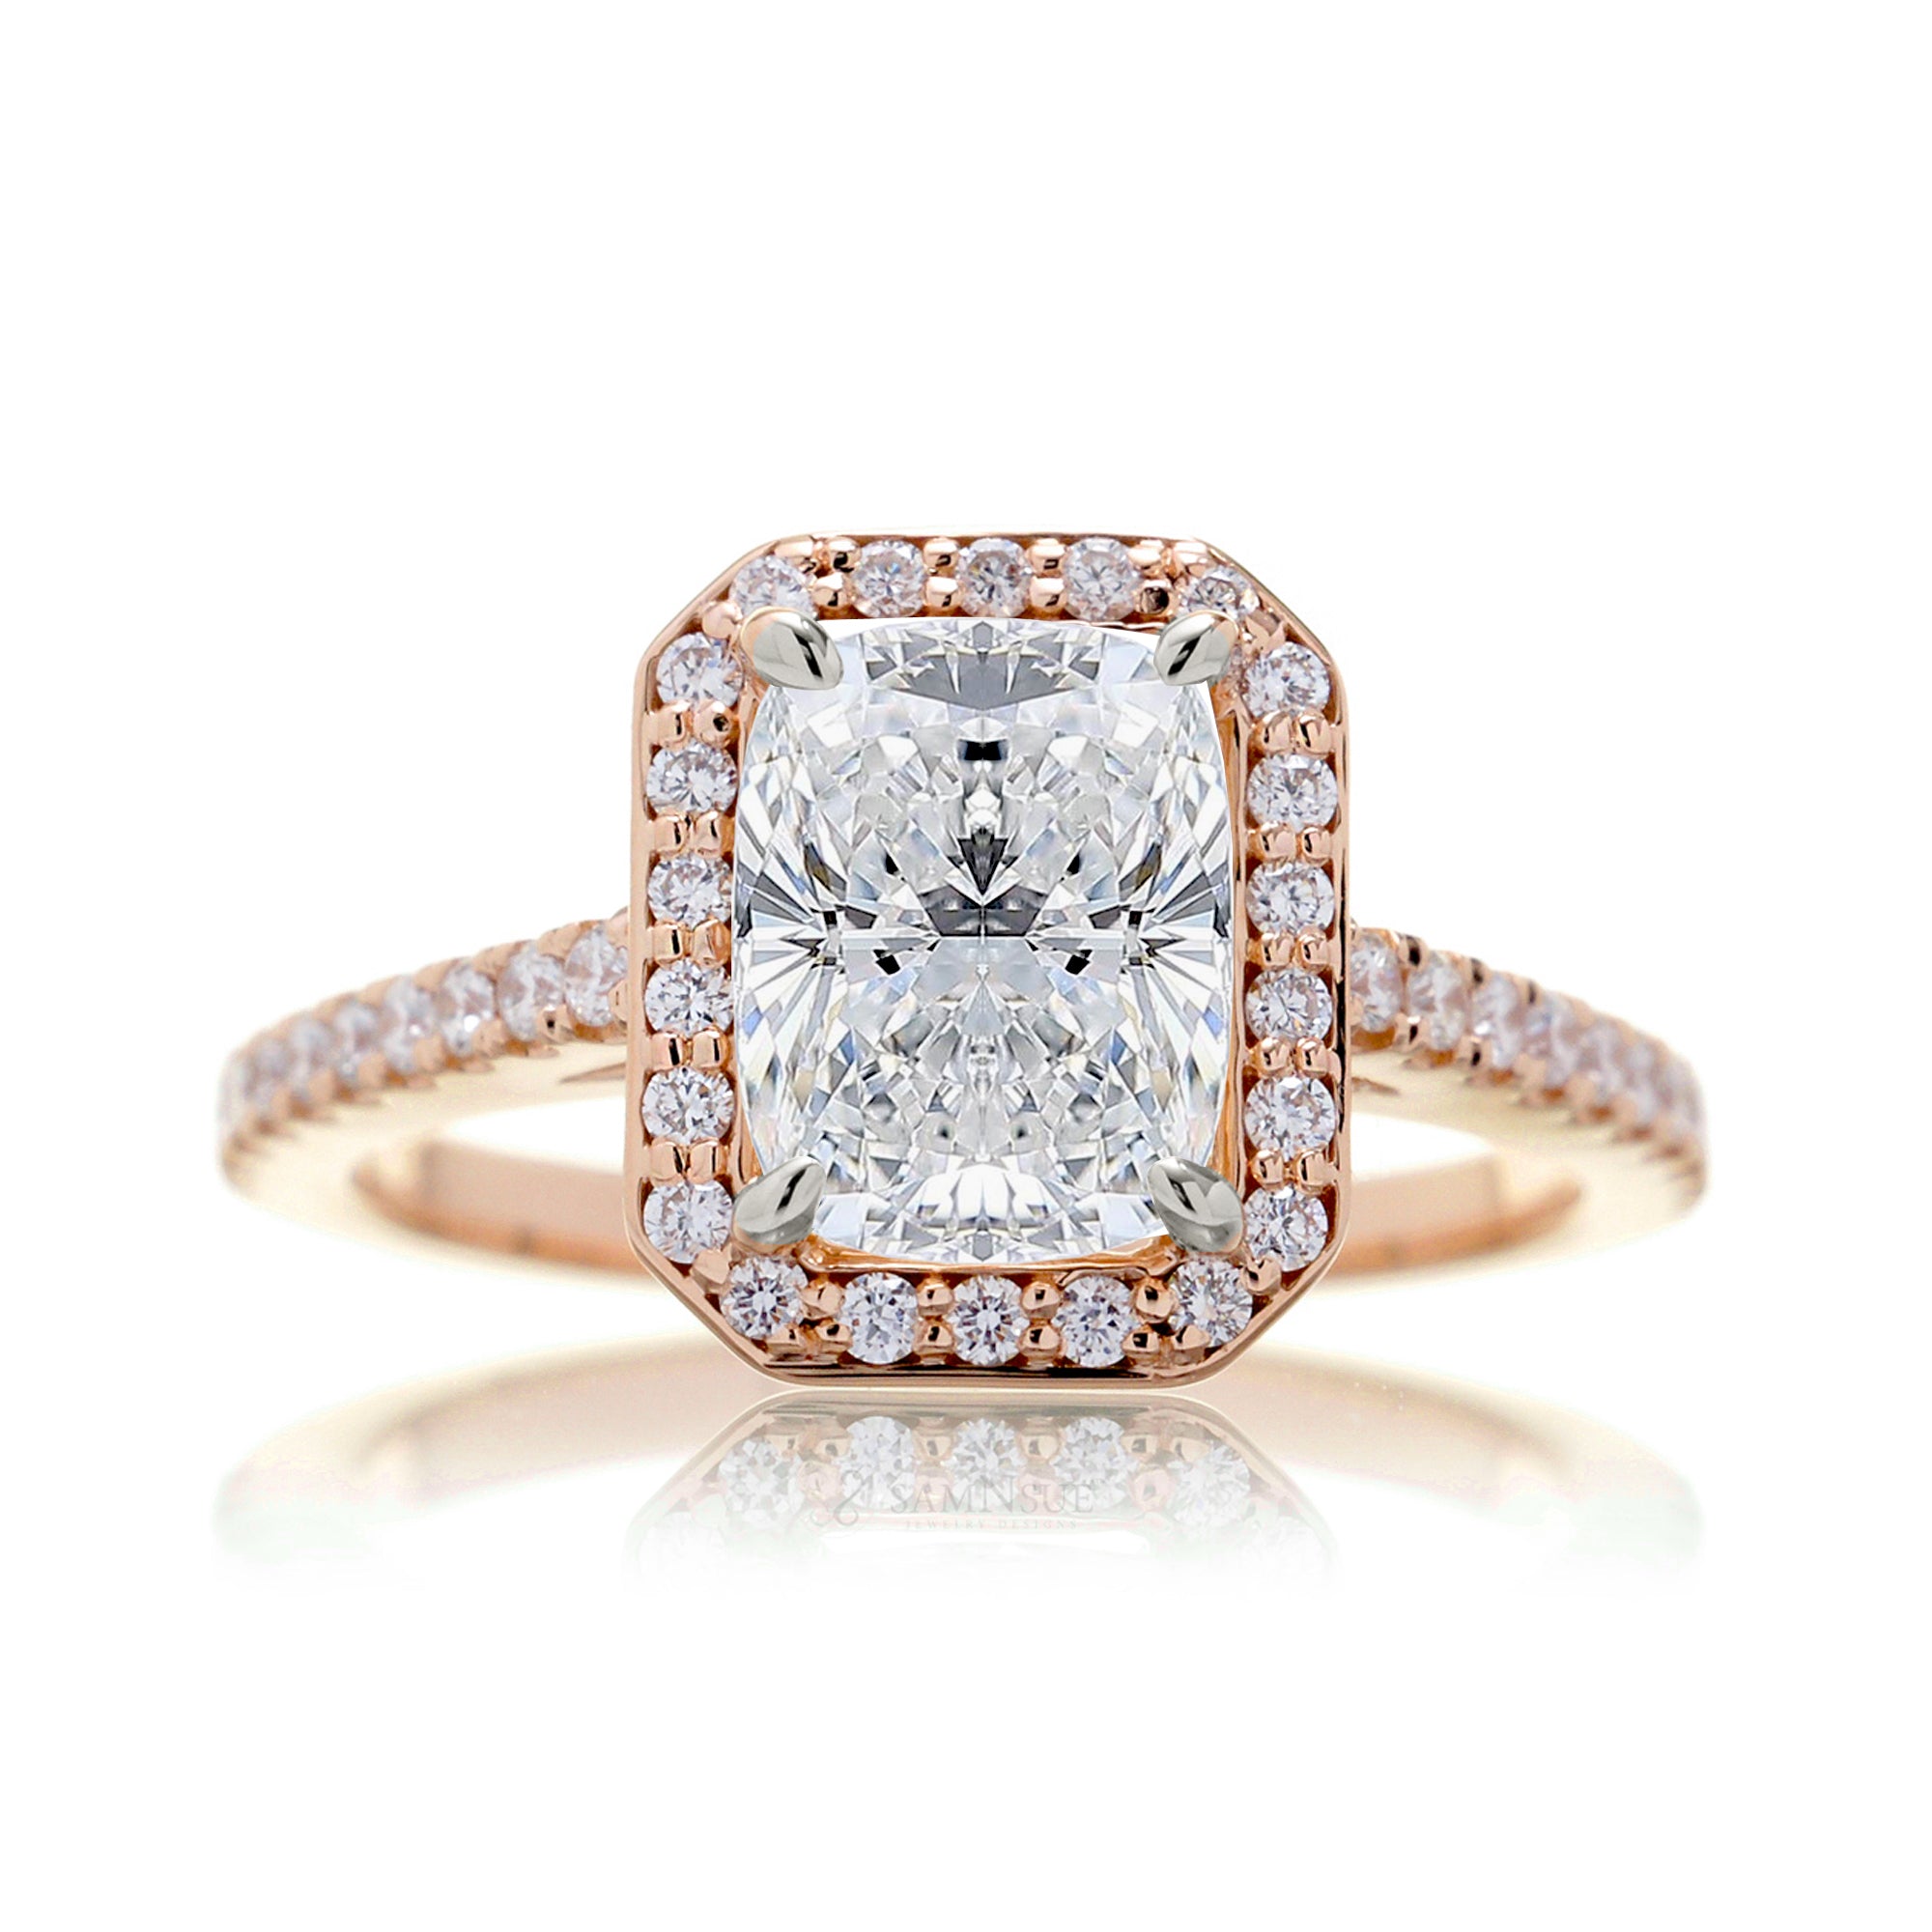 Cushion lab-grown diamond halo cathedral engagement ring - the Steffy rose gold